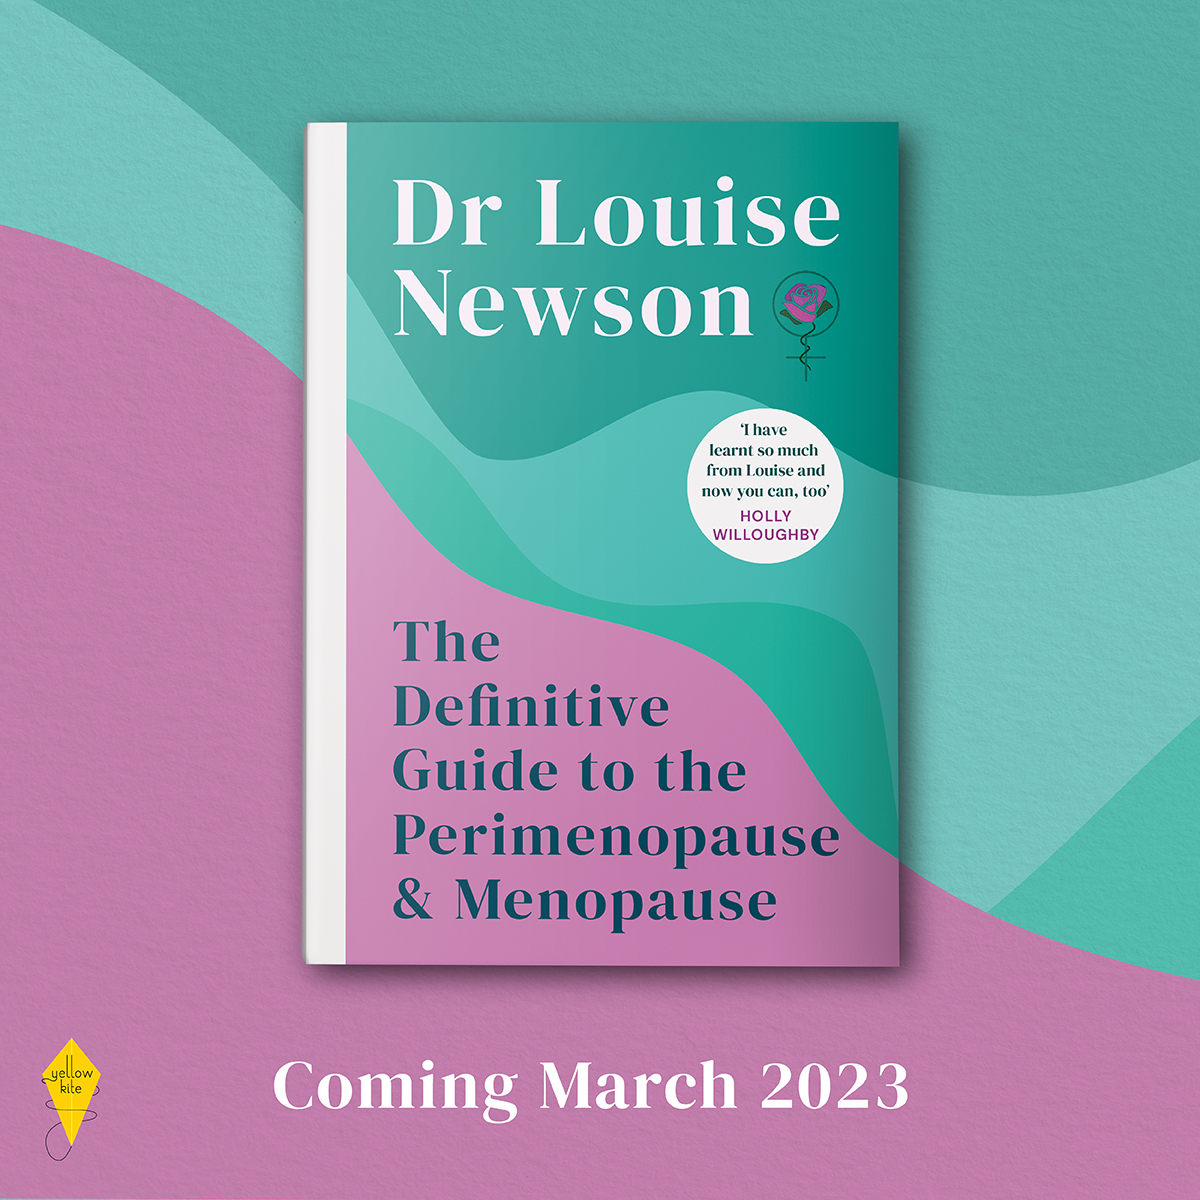 Menopause by Dr. Louise Newson, Quarto At A Glance